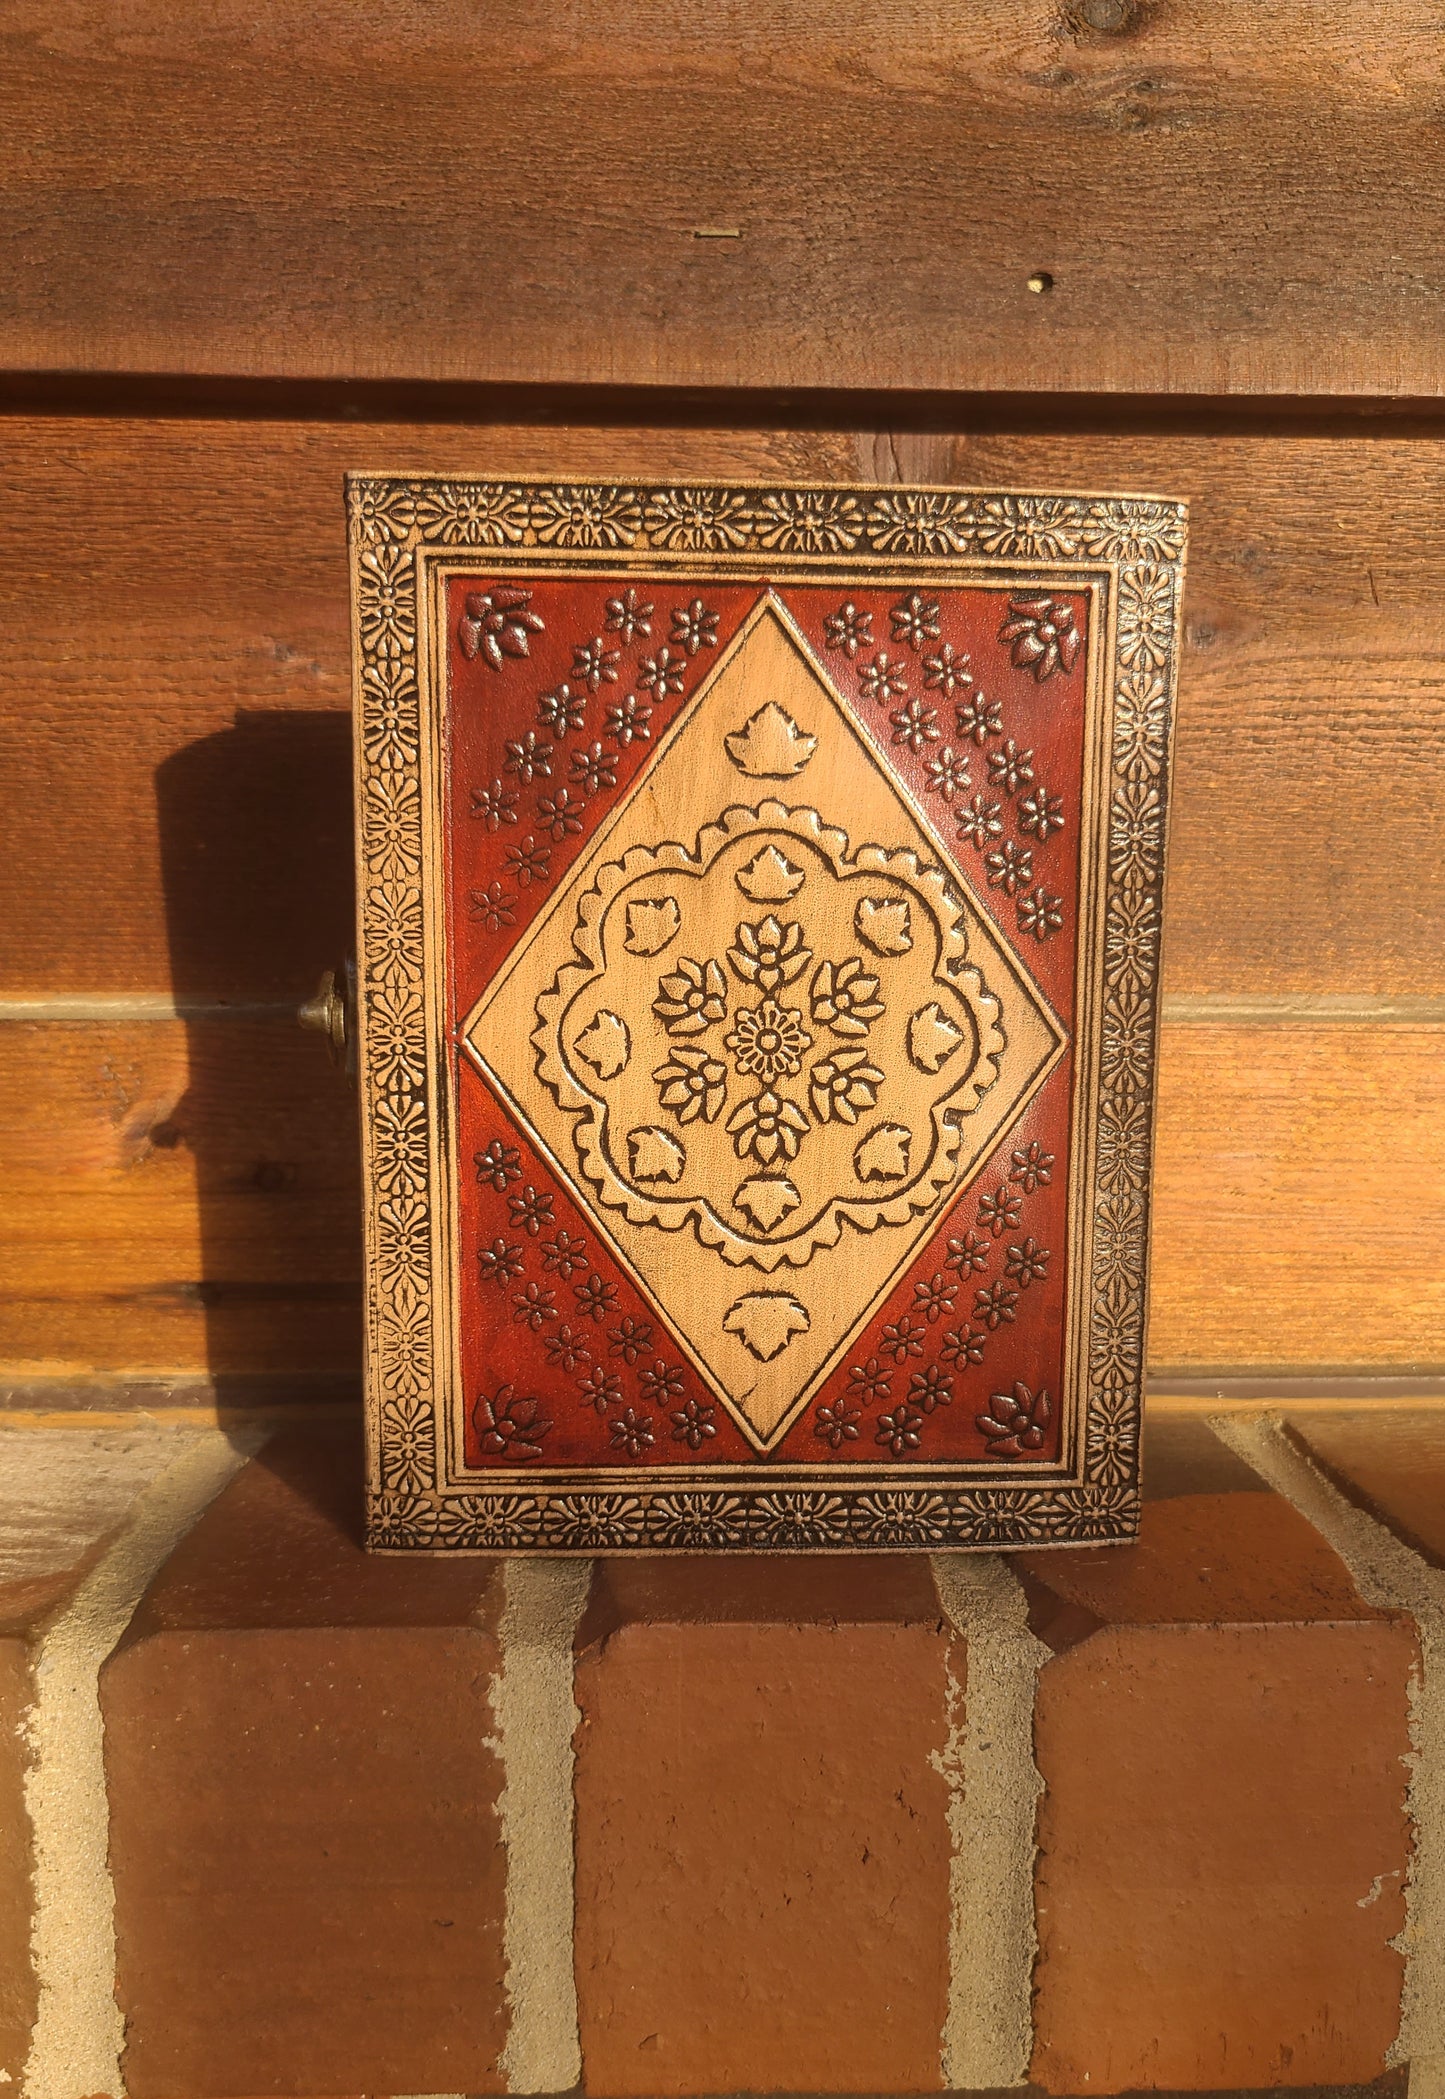 Antique Celtic Star Leather Journal - Red and Tan-Status Co. Leather Studio